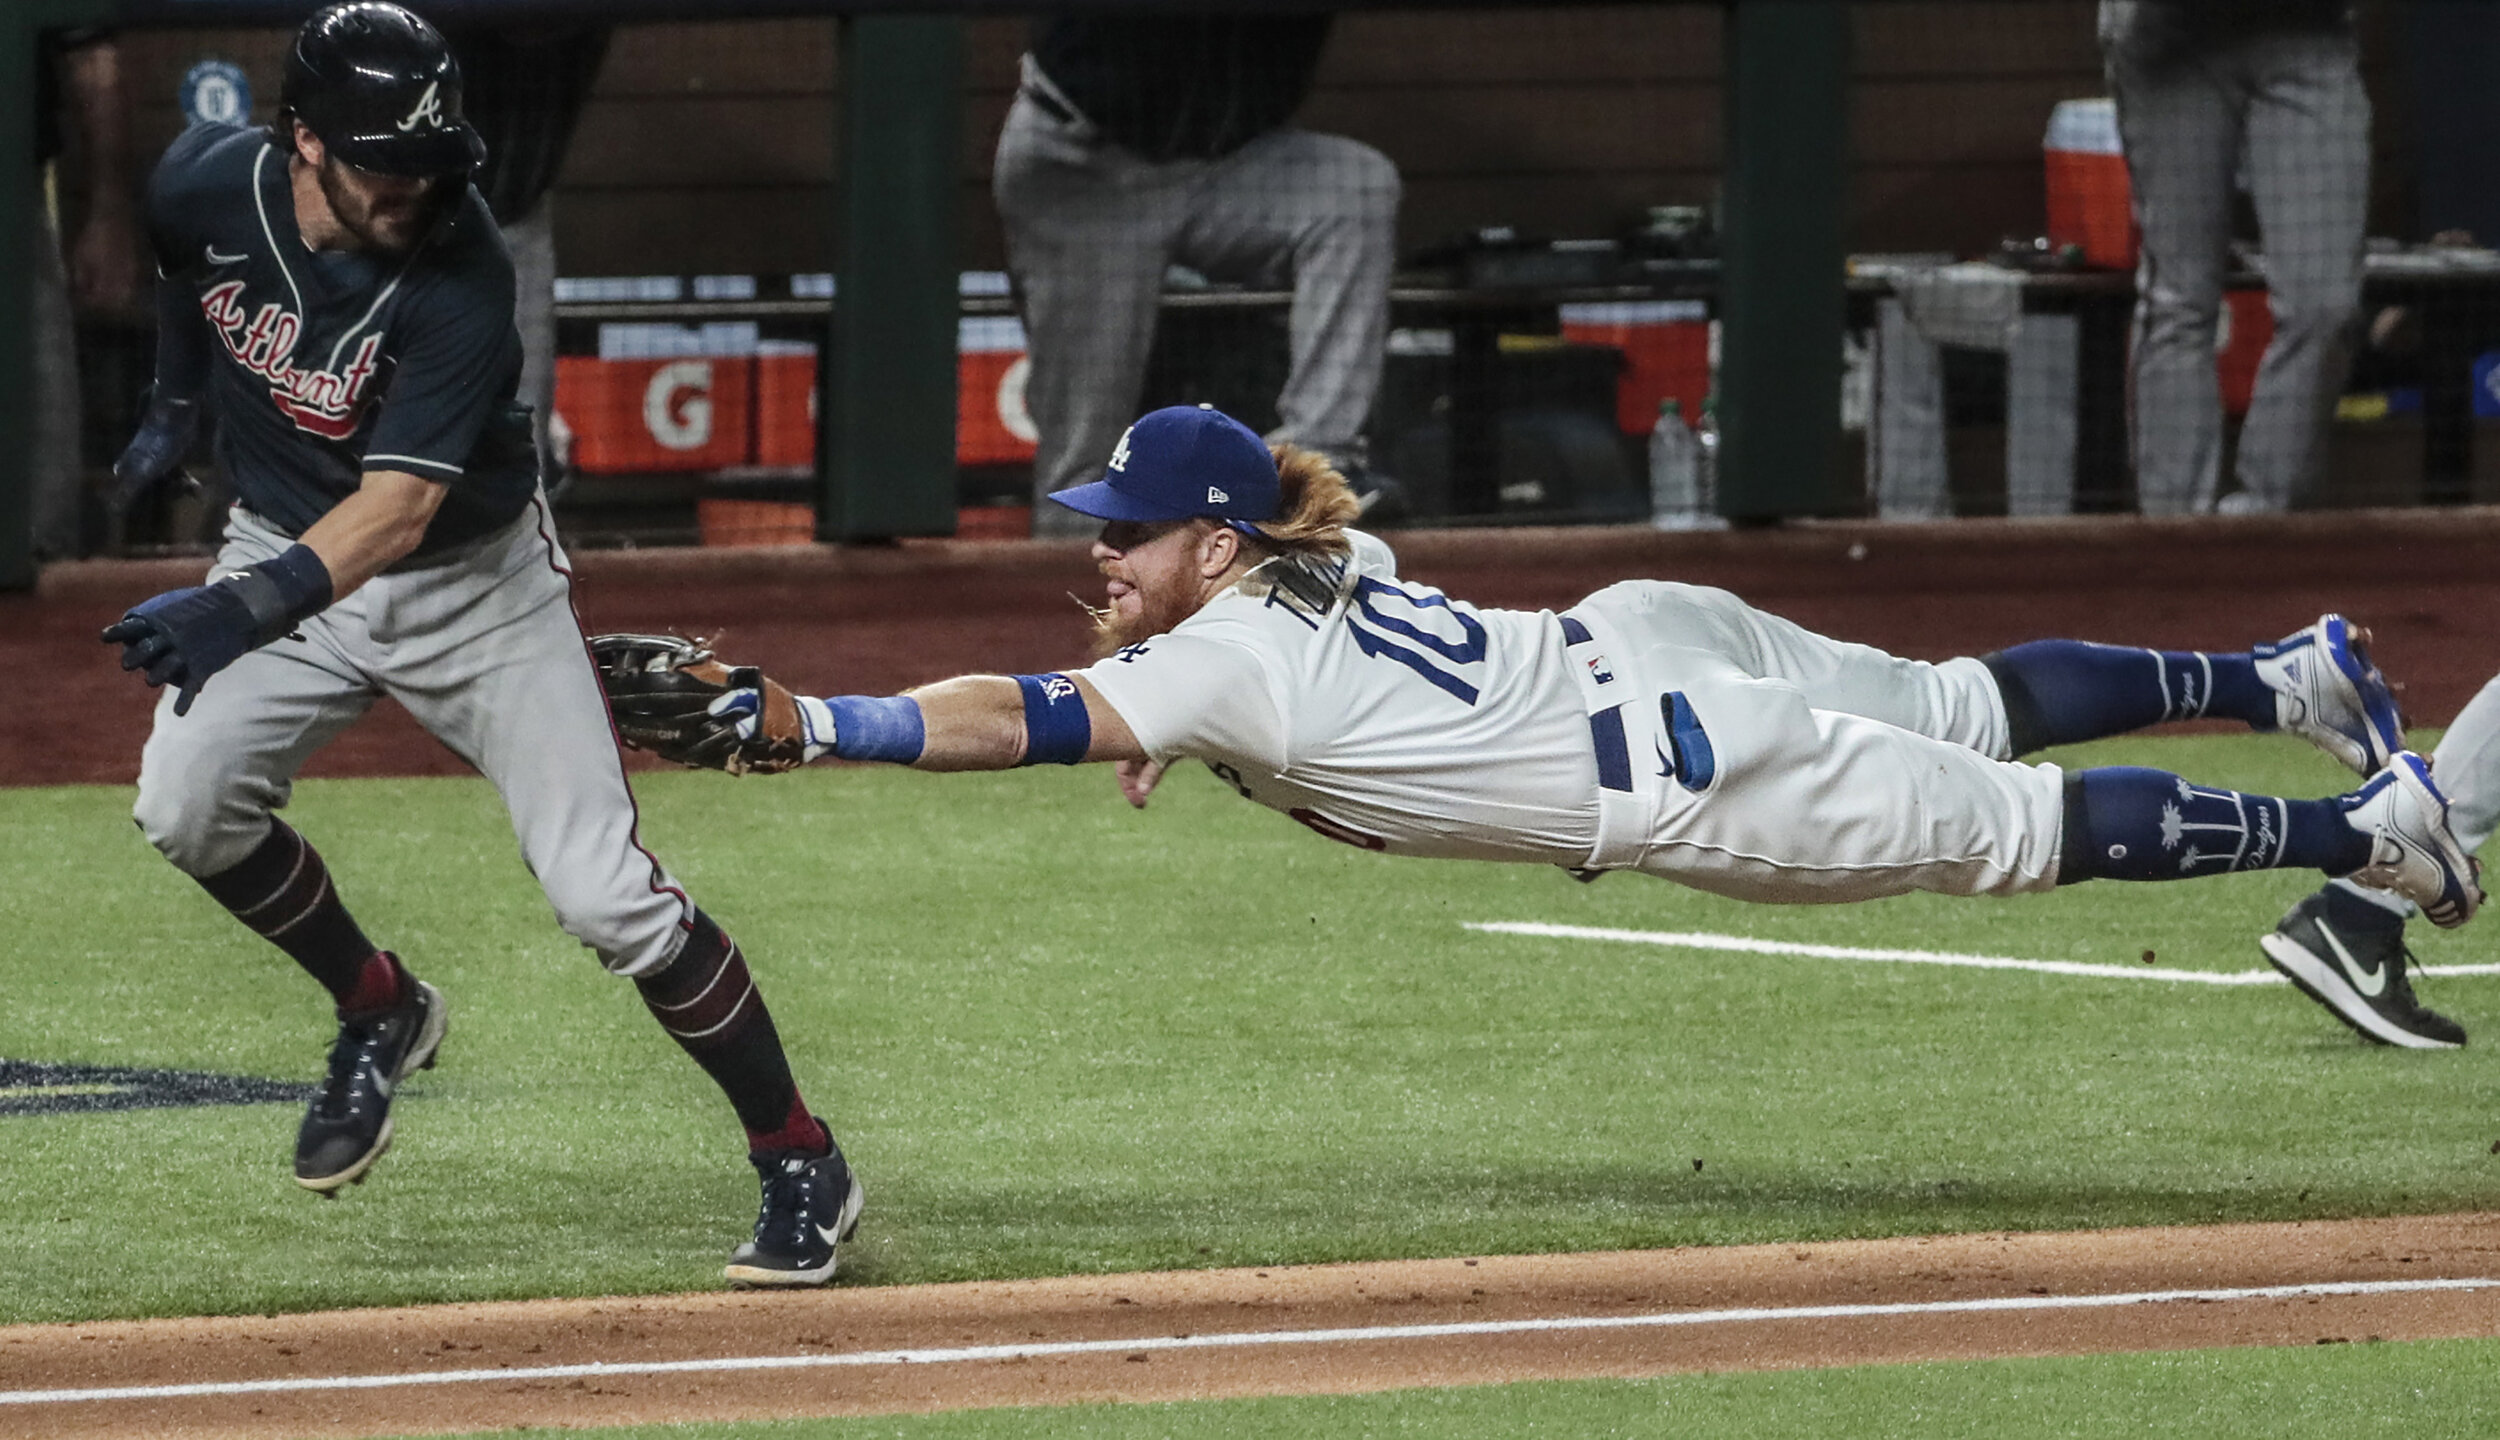  Arlington, Texas,  Sunday, October 18, 2020. Los Angeles Dodgers third baseman Justin Turner (10) tags out Atlanta Braves shortstop Dansby Swanson (7) to start double play in the fourth inning in game seven of the NLCS at Globe Life Field. 